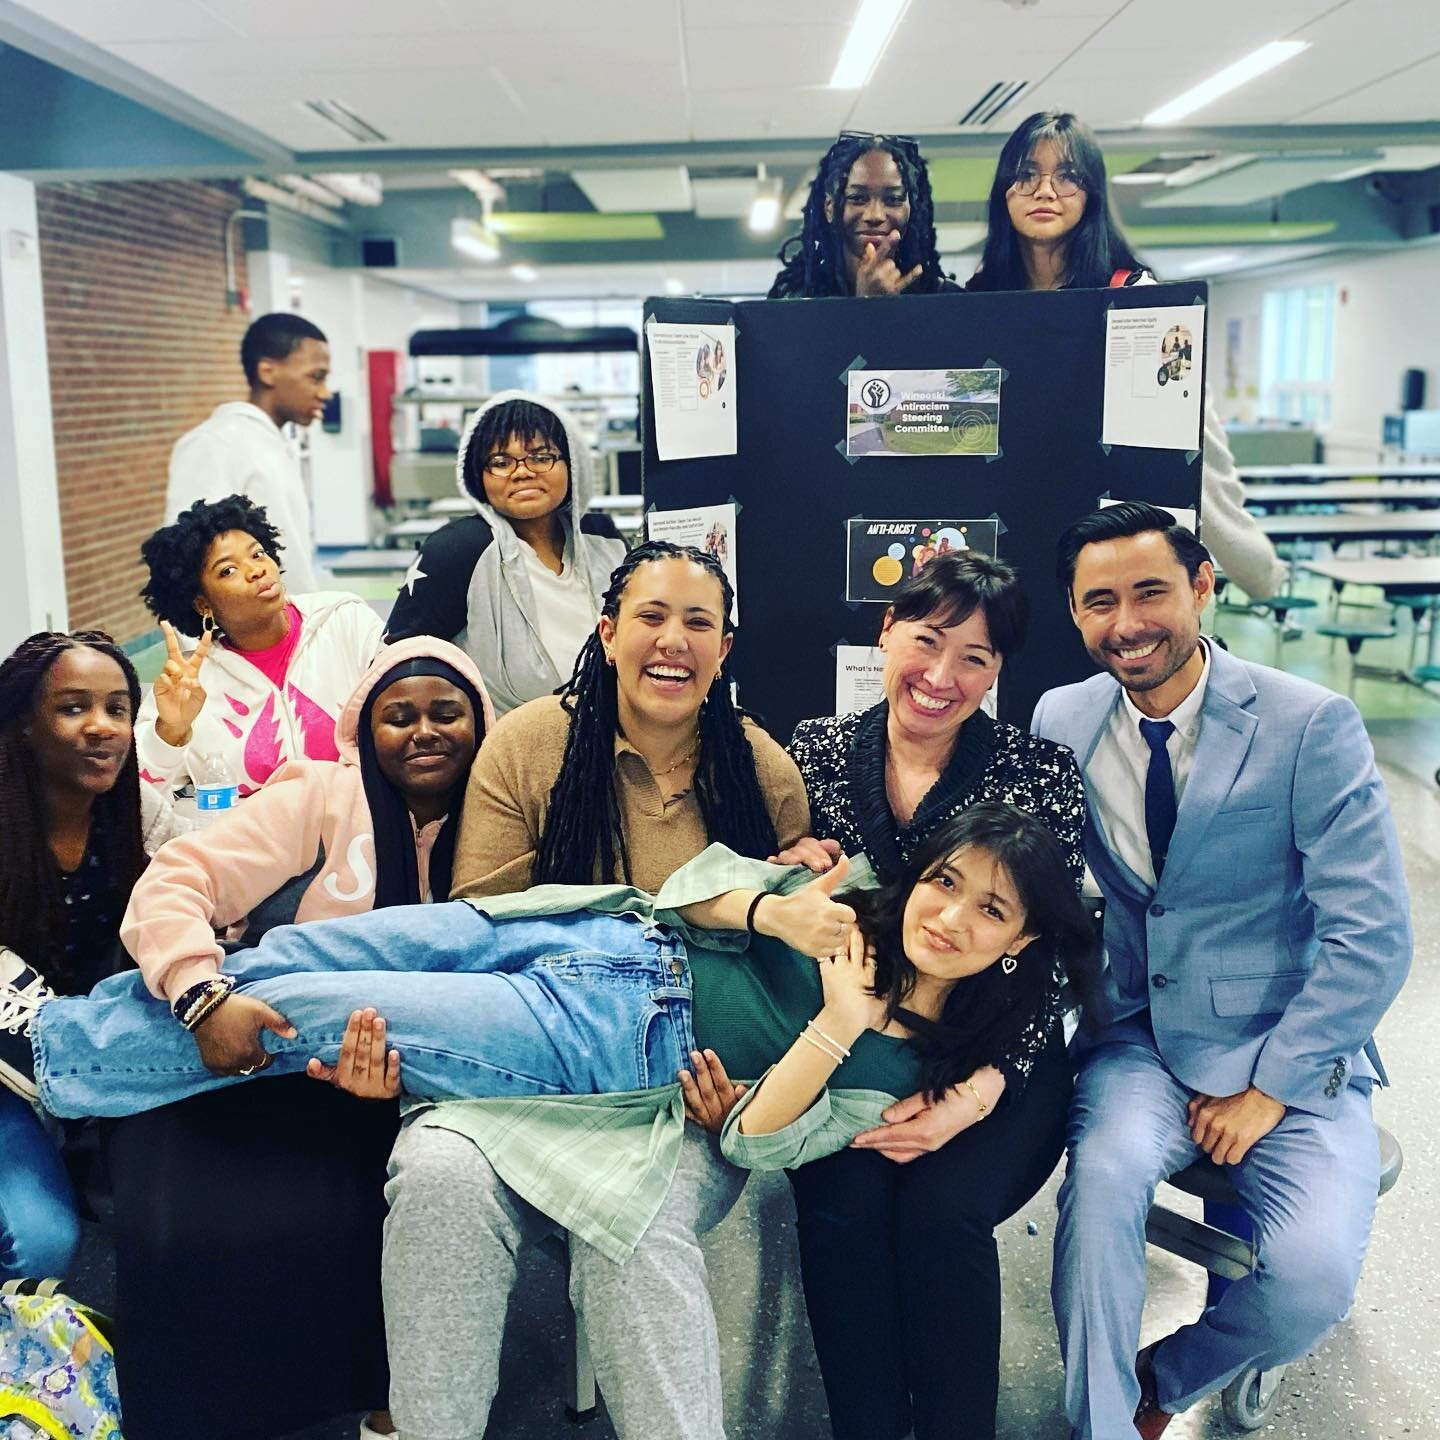 Our @winooski4antiracism crew is amazing. They always fill me with energy, hope and awe. 

Tonight they asked our Superintendent finalists the hard questions and engaged them in ways that taught me quite a few things&hellip;

Here they are taking a d